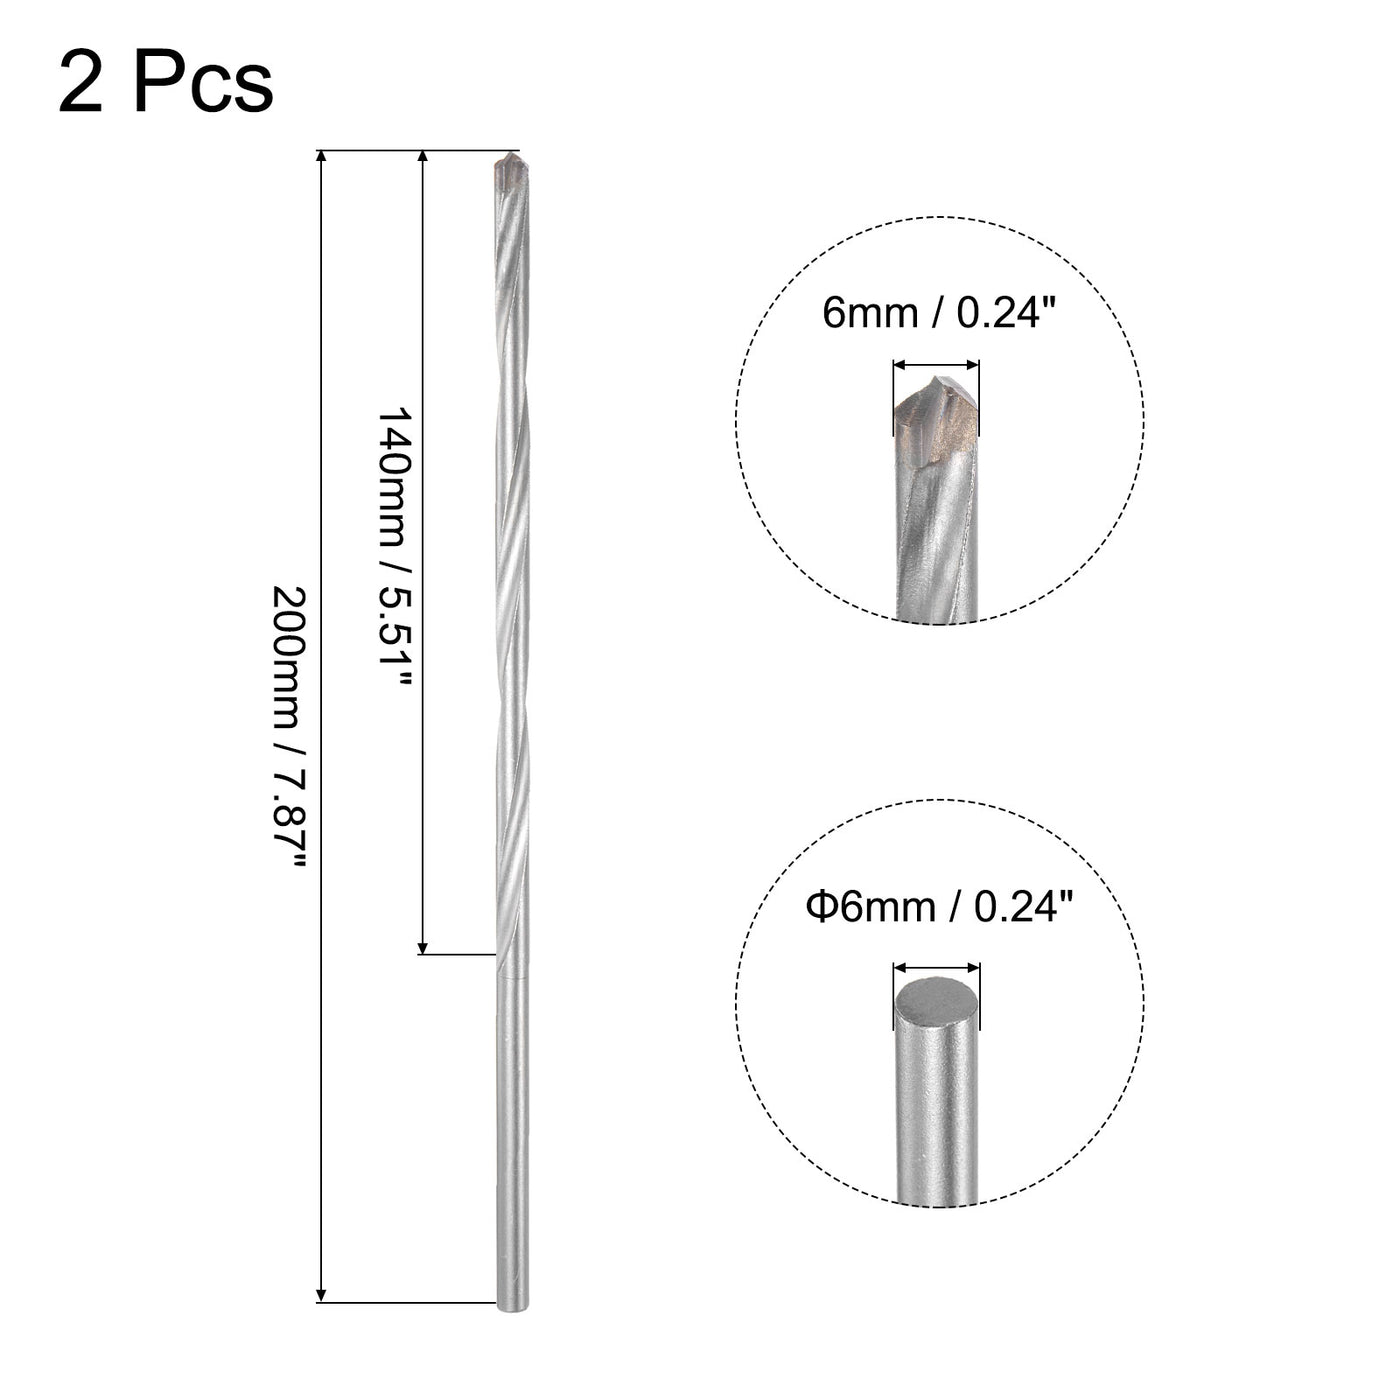 uxcell Uxcell 6mm Cutting Dia Round Shank Cemented Carbide Twist Drill Bit, 200mm Length 2 Pcs